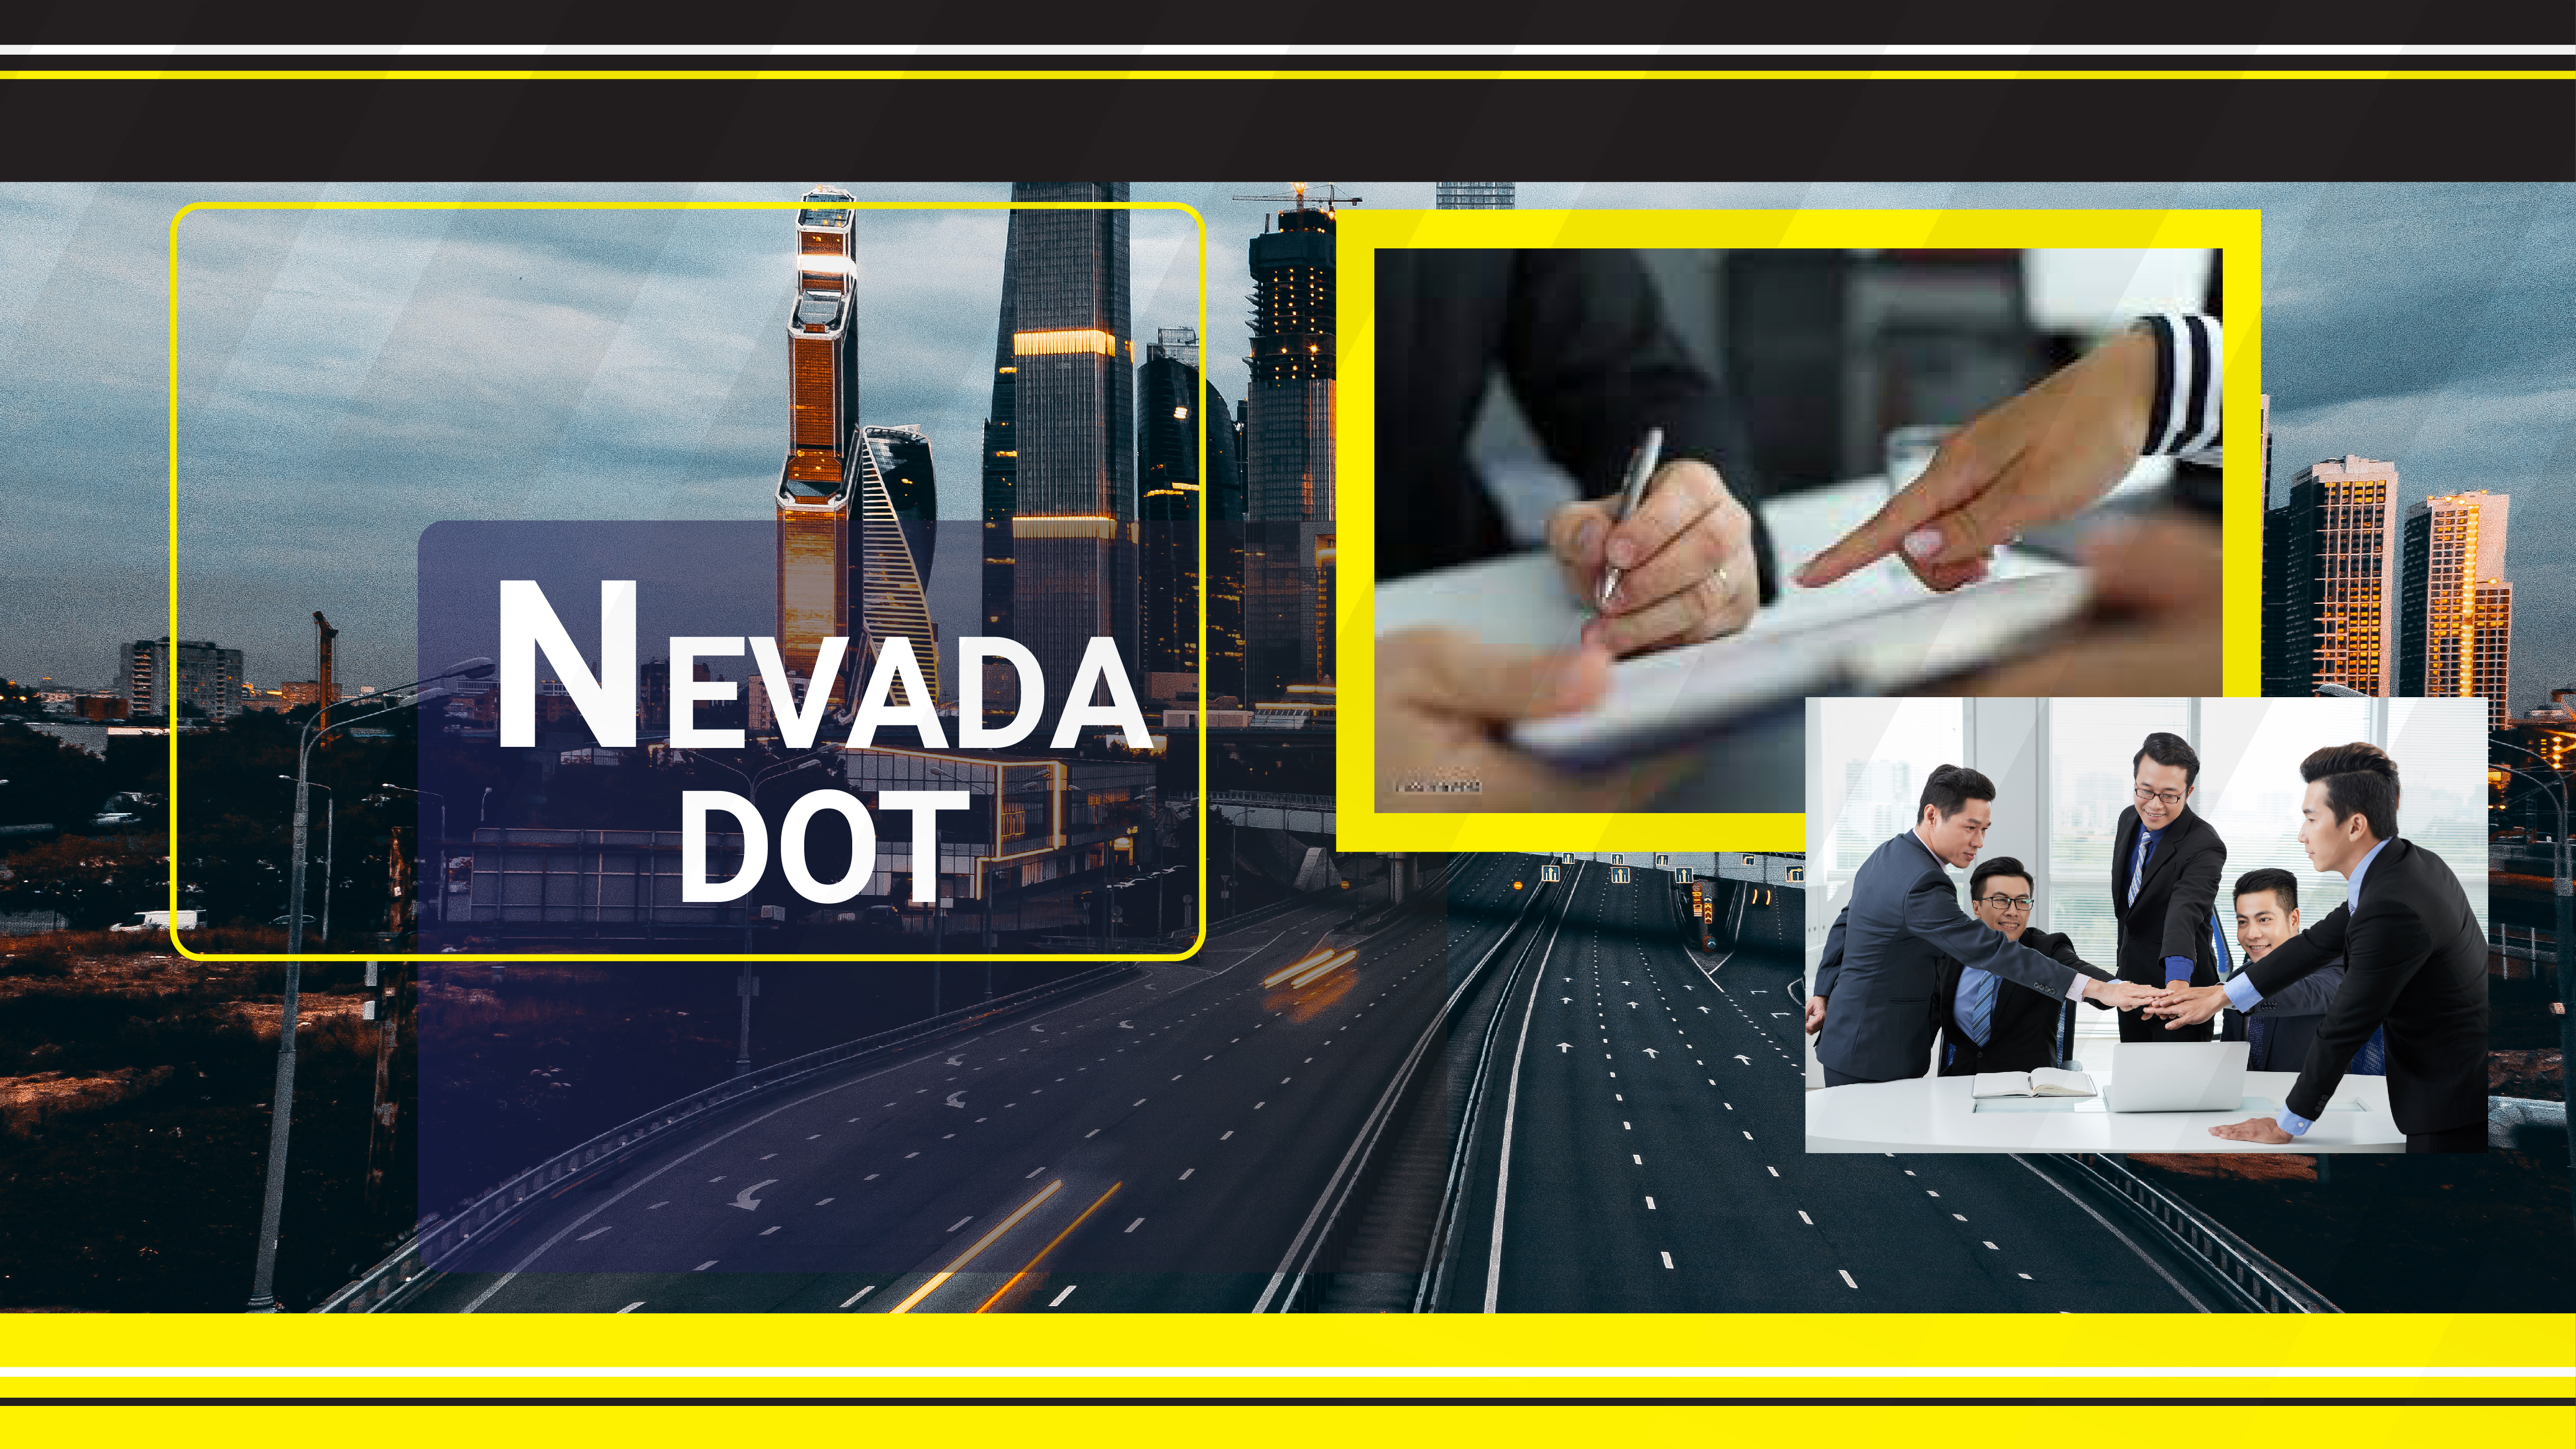 Nevada DOT Number product image reference 2